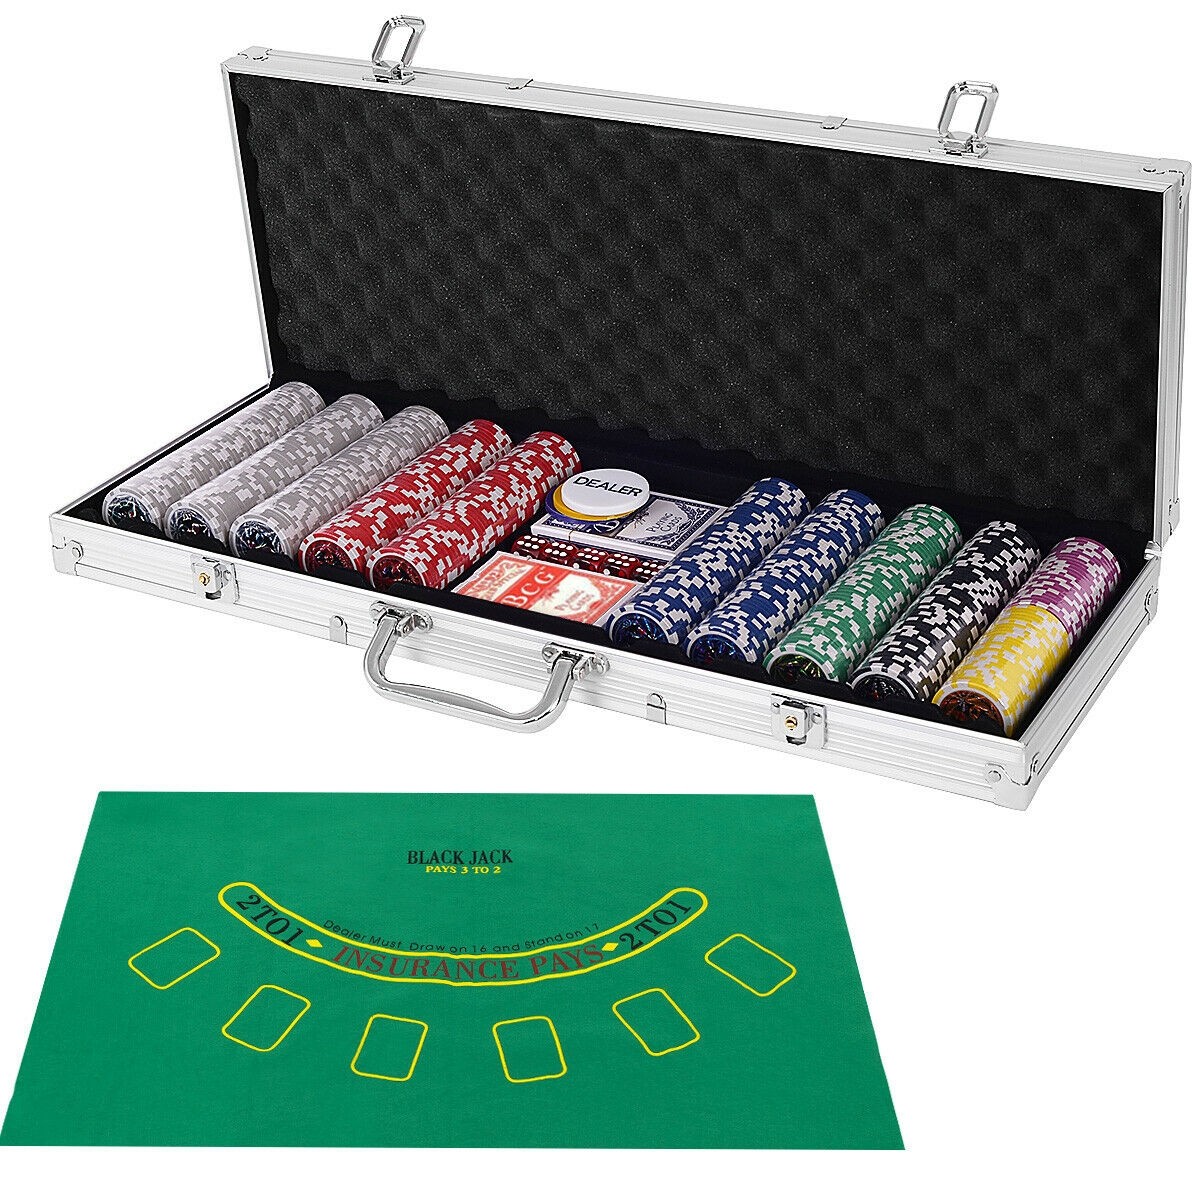 Texas Holdem Cards With 500 Jetton And Dice In Aluminum Case